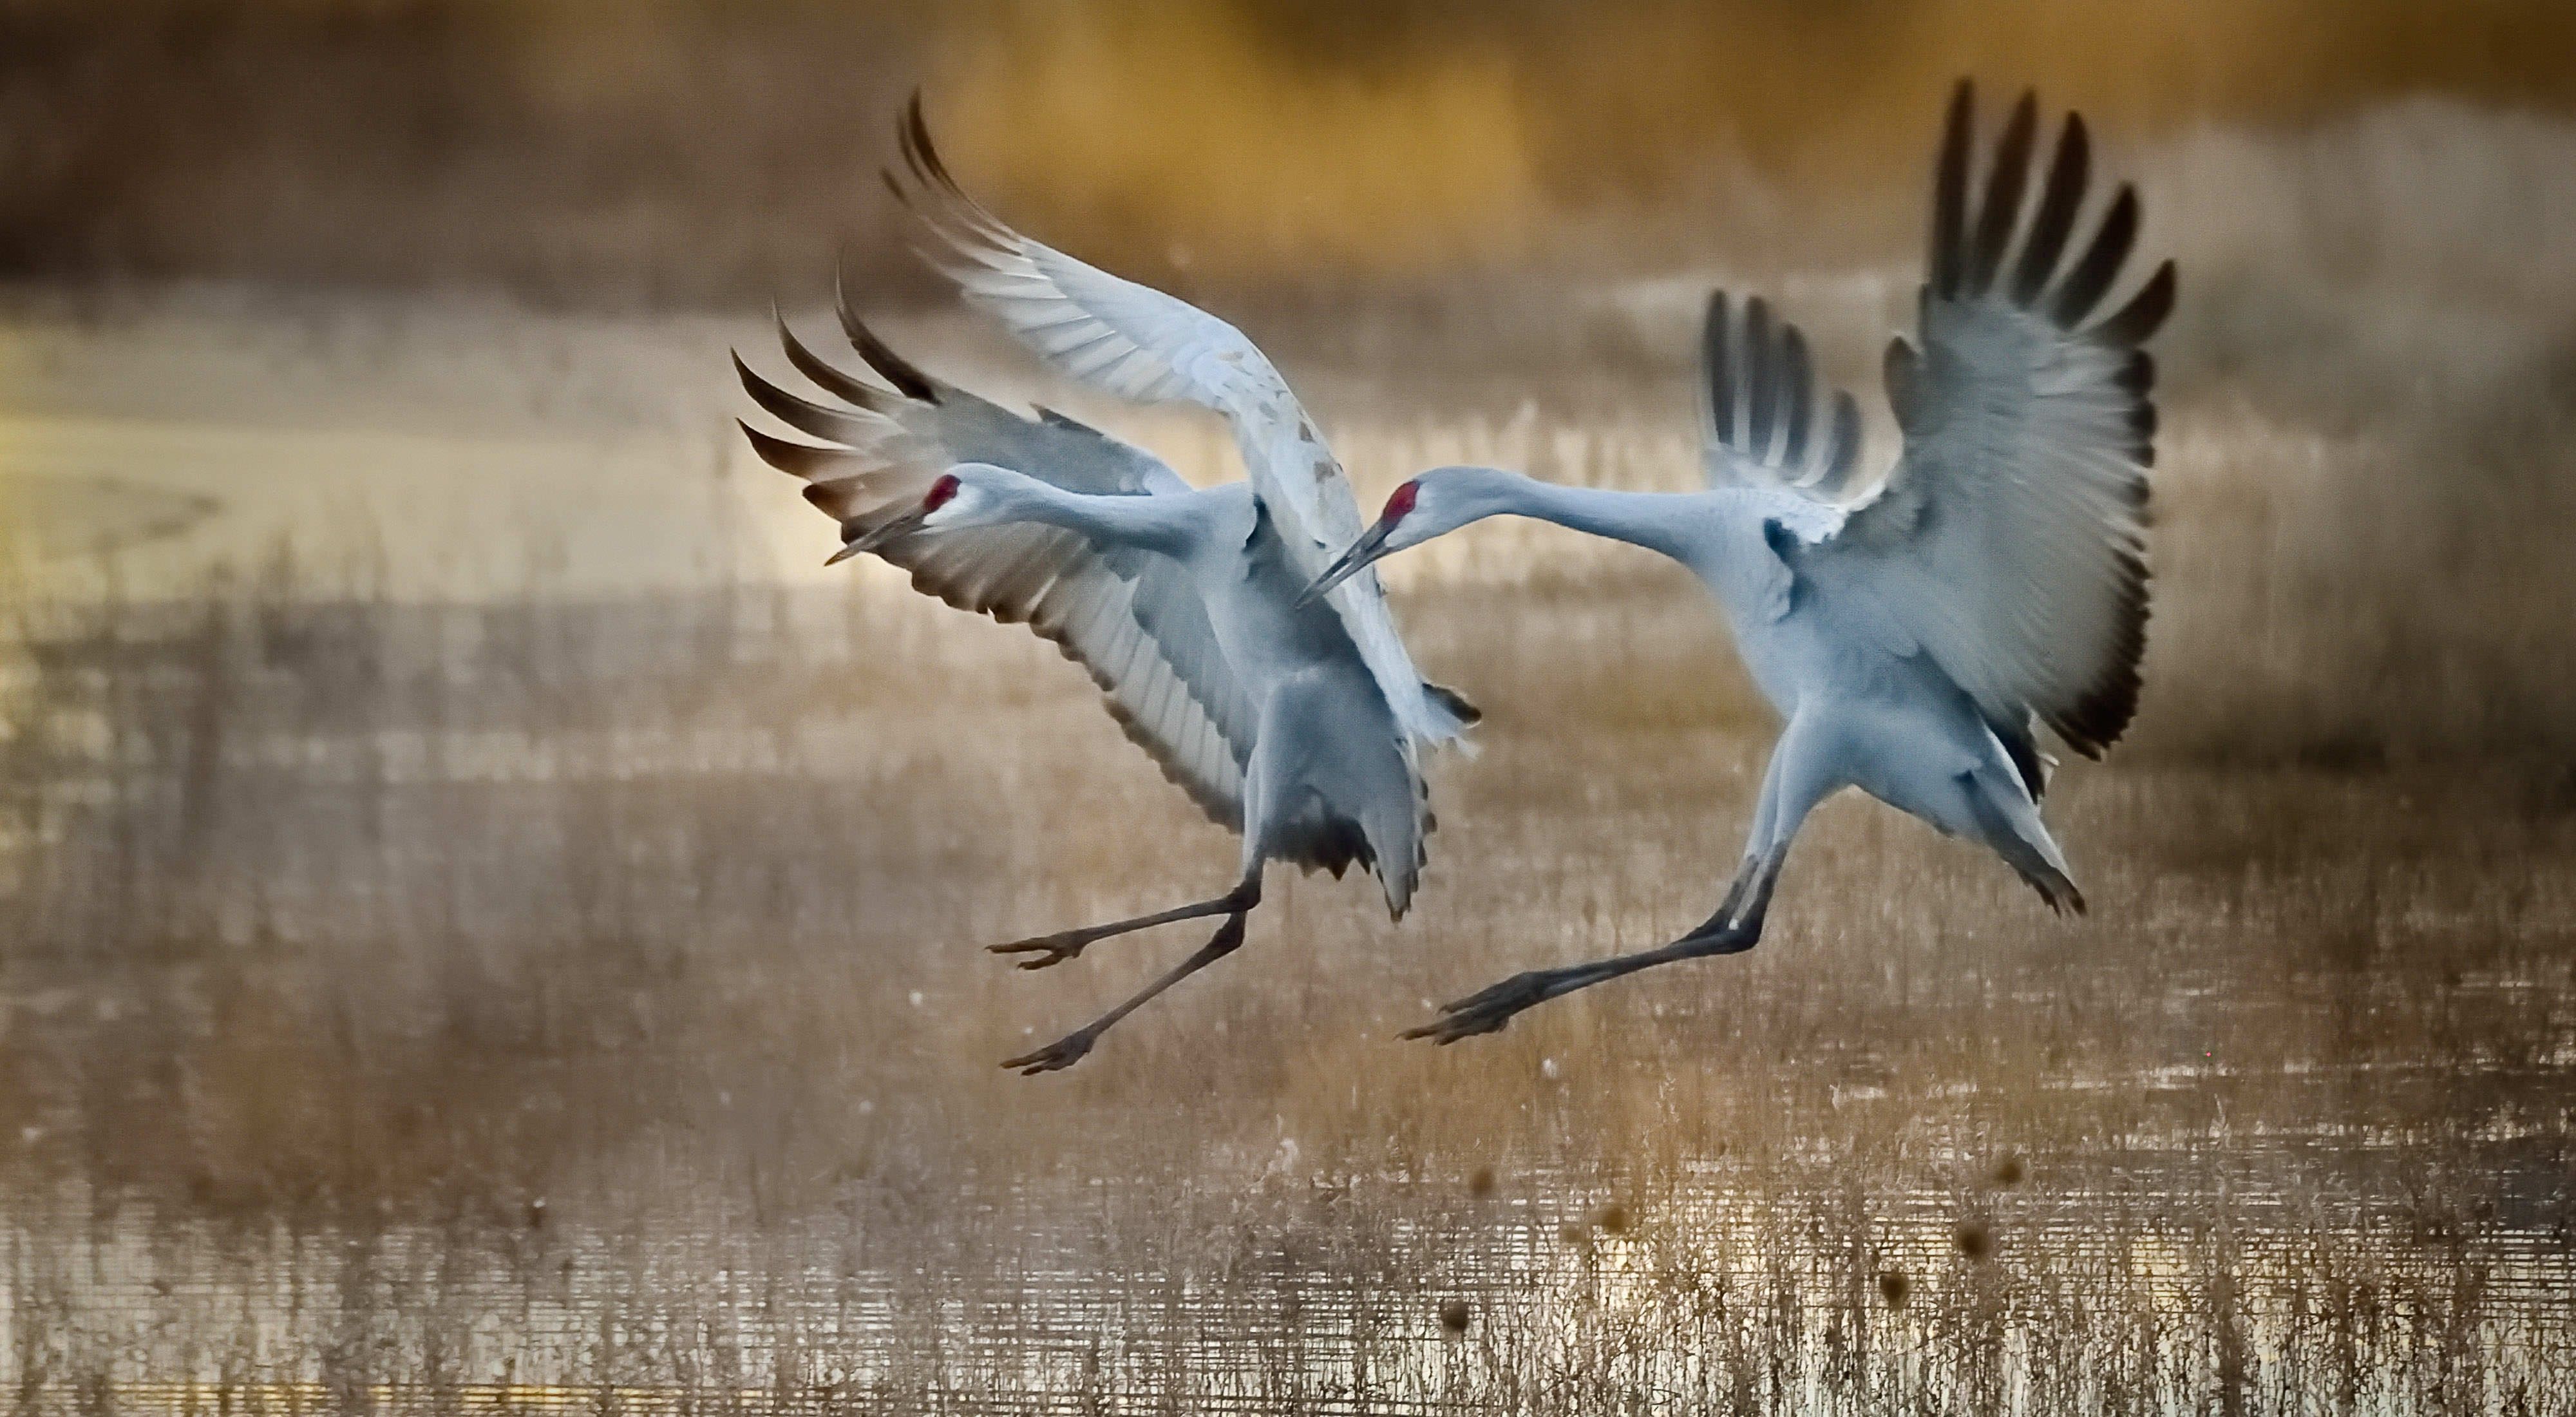 Two adult sandhill cranes lift their wings and extend their legs as they come down to land in a shallow marsh.